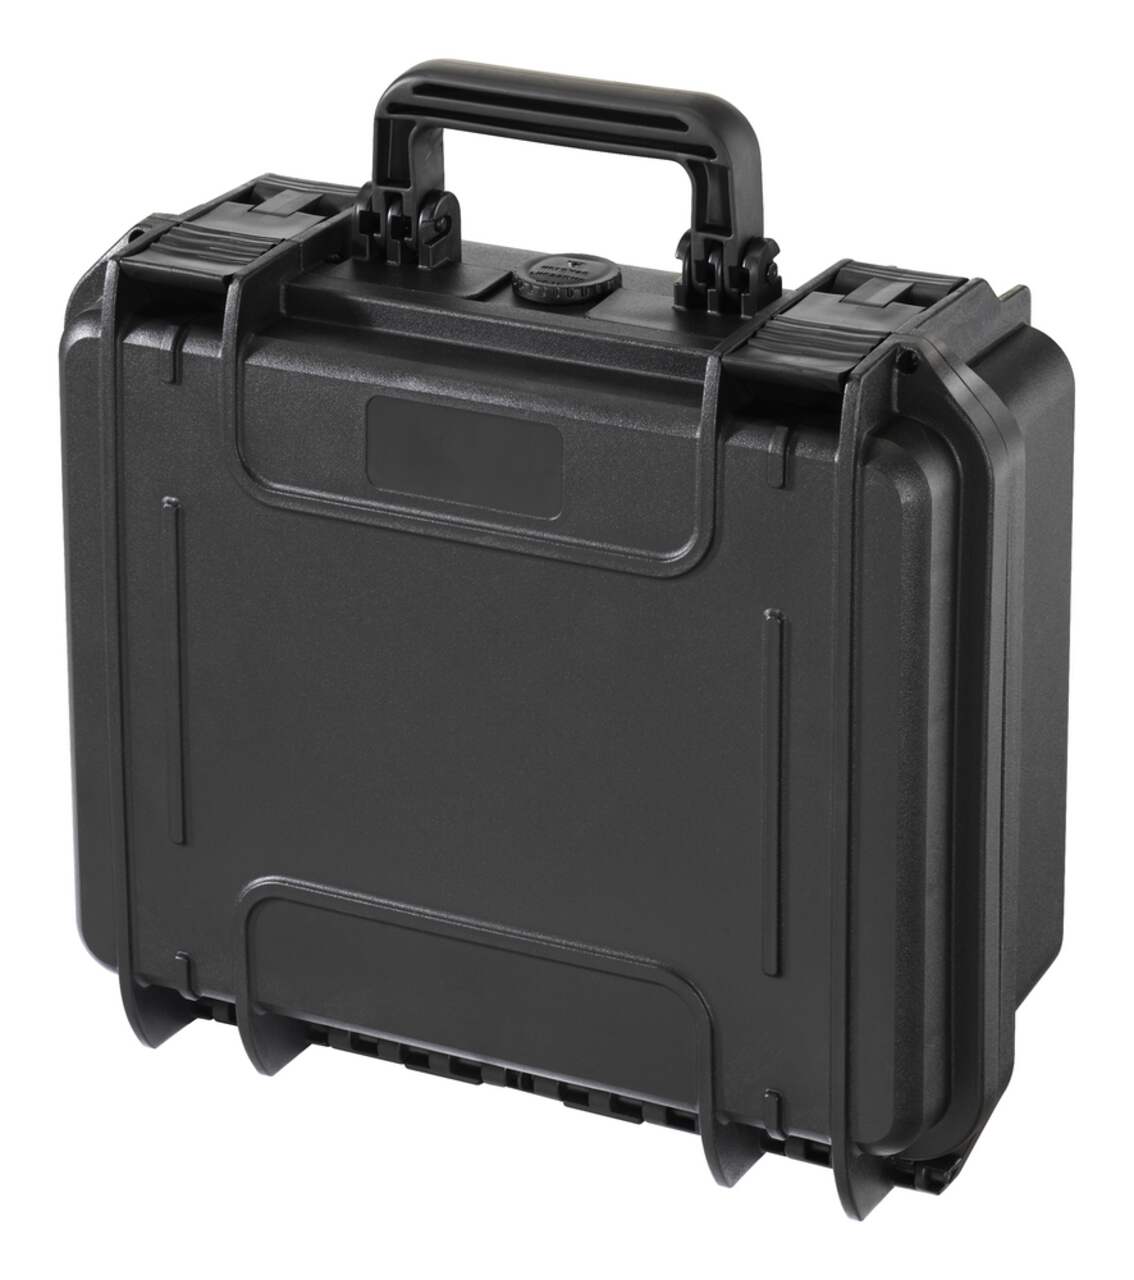 MAXIMUM Portable IP67 Waterproof Case/ Tool Box with Foam Layers, Black,  Small, 13-in